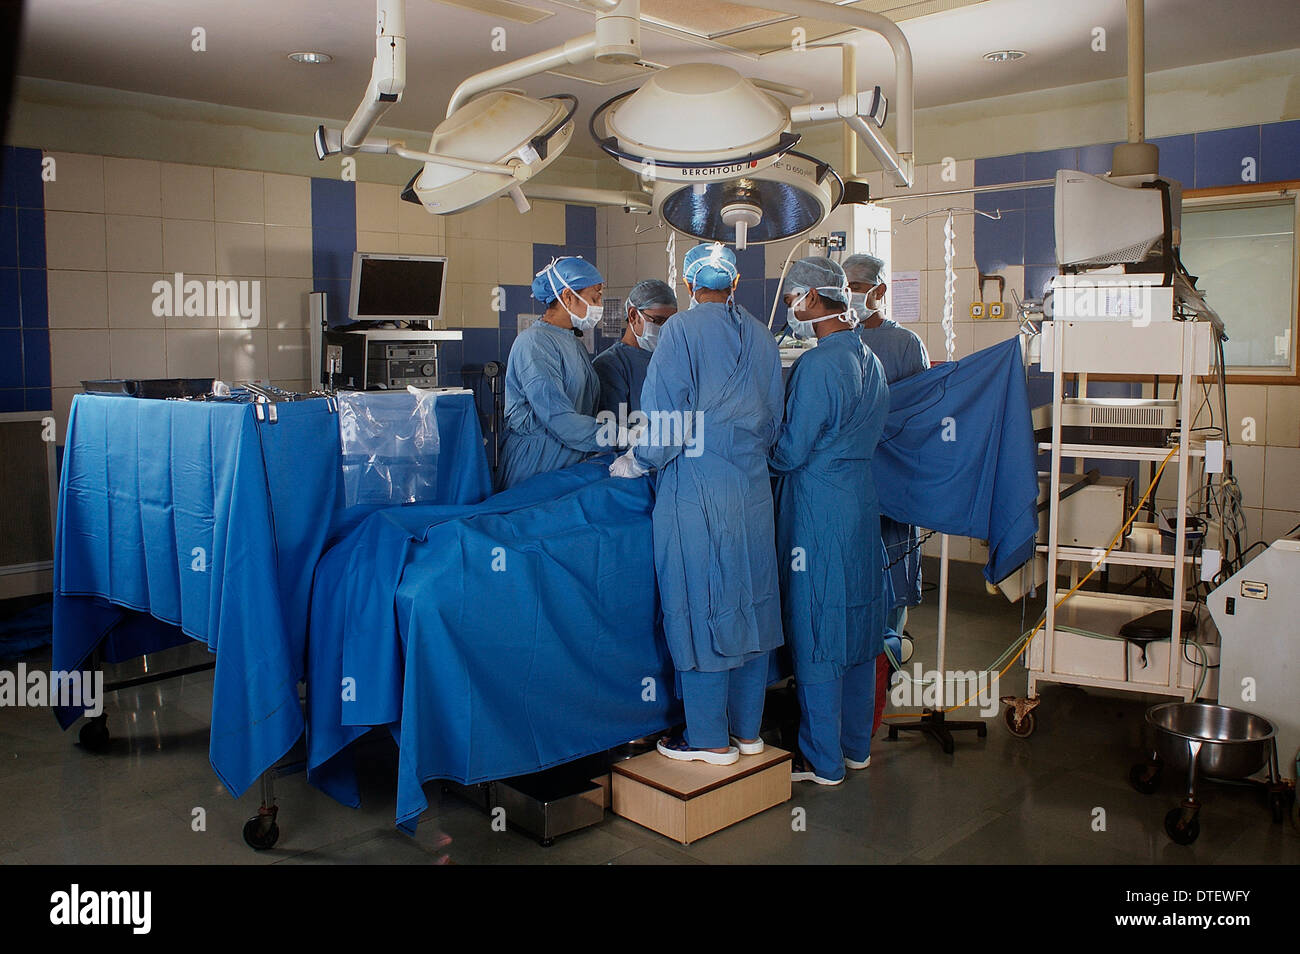 Doctors Performing An Operation In An Operation Theater Stock Photo Alamy